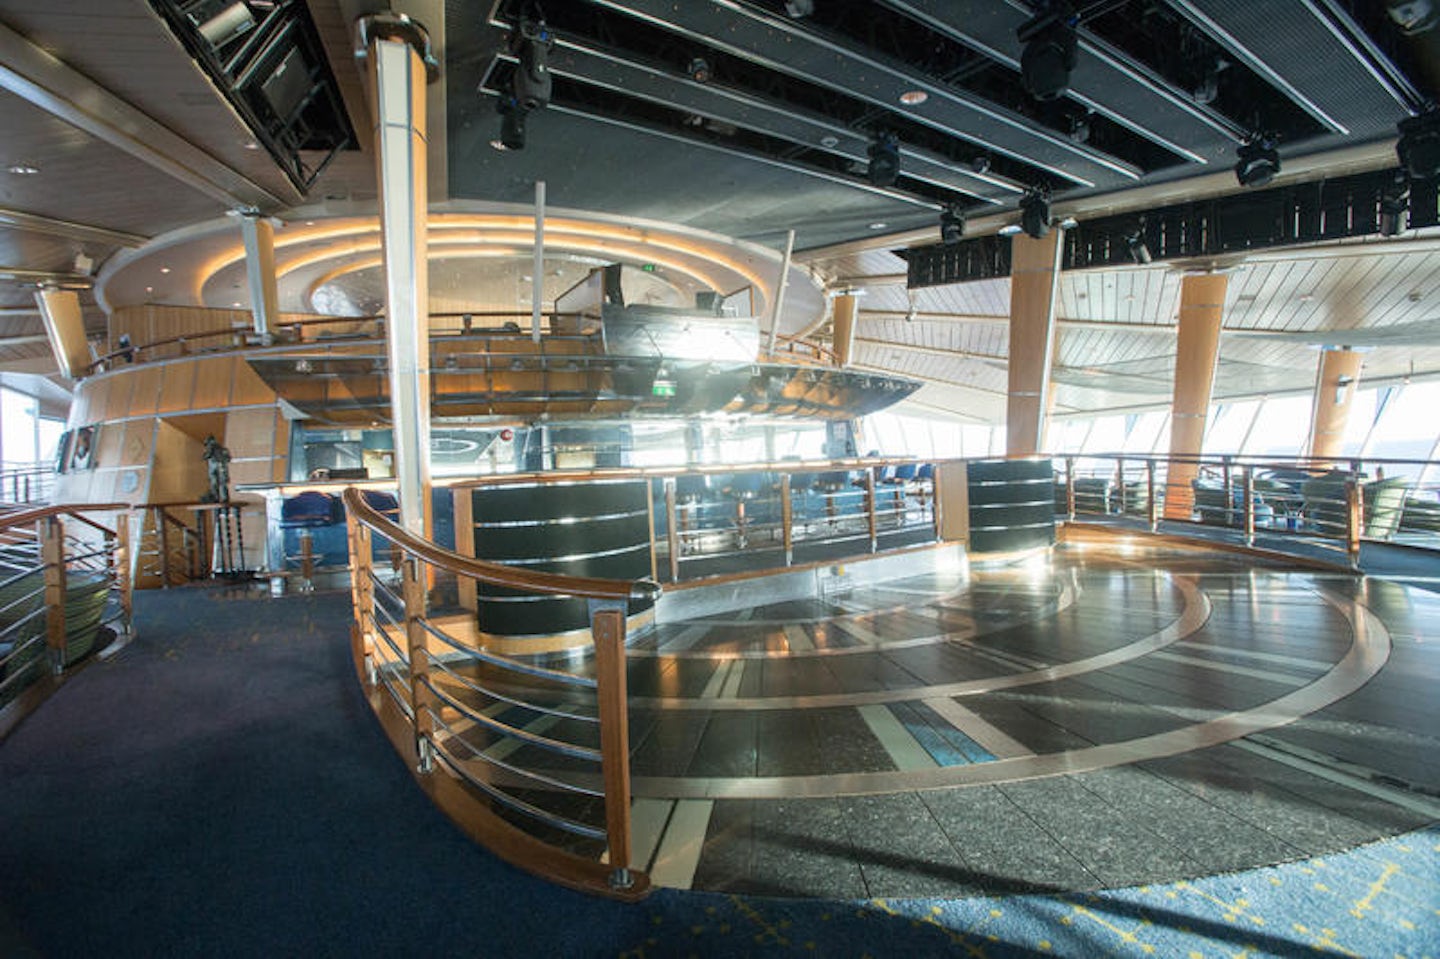 Viking Crown Lounge on Enchantment of the Seas